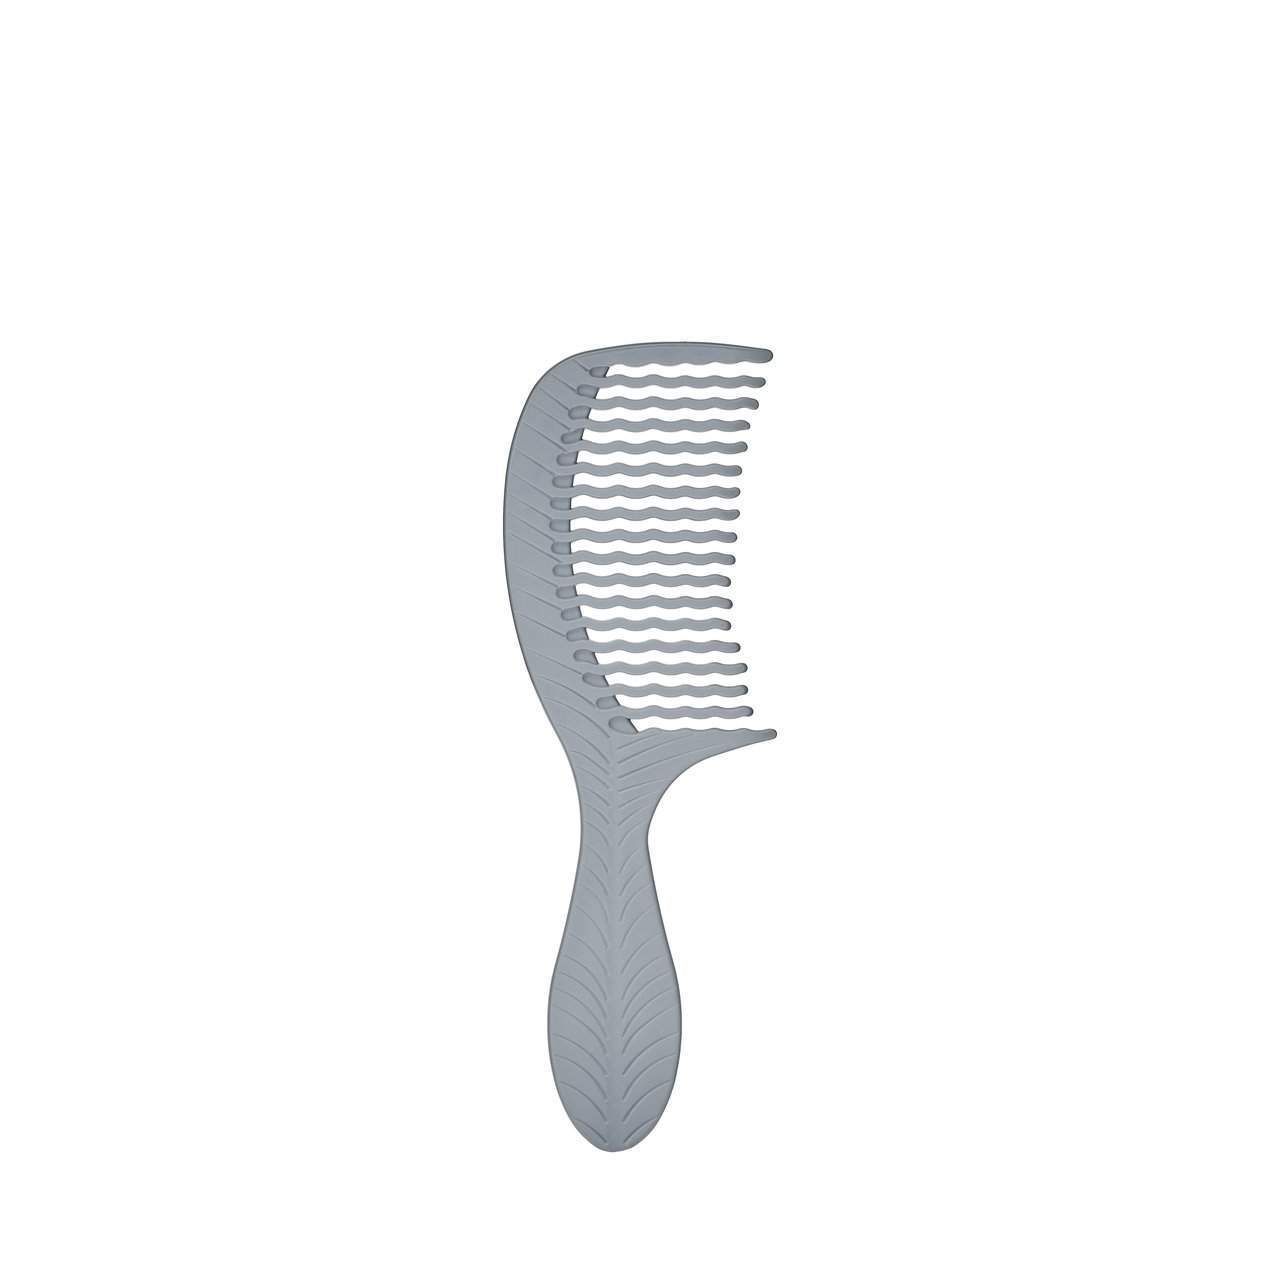 Wet Brush Go Green Treatment Comb-Wet Brush-Brand_Wet Brush,Collection_Hair,Collection_Tools and Brushes,Tool_Brushes,Tool_Combs,Tool_Hair Tools,Trendy22,WET_Combs,WET_Go Green Collection